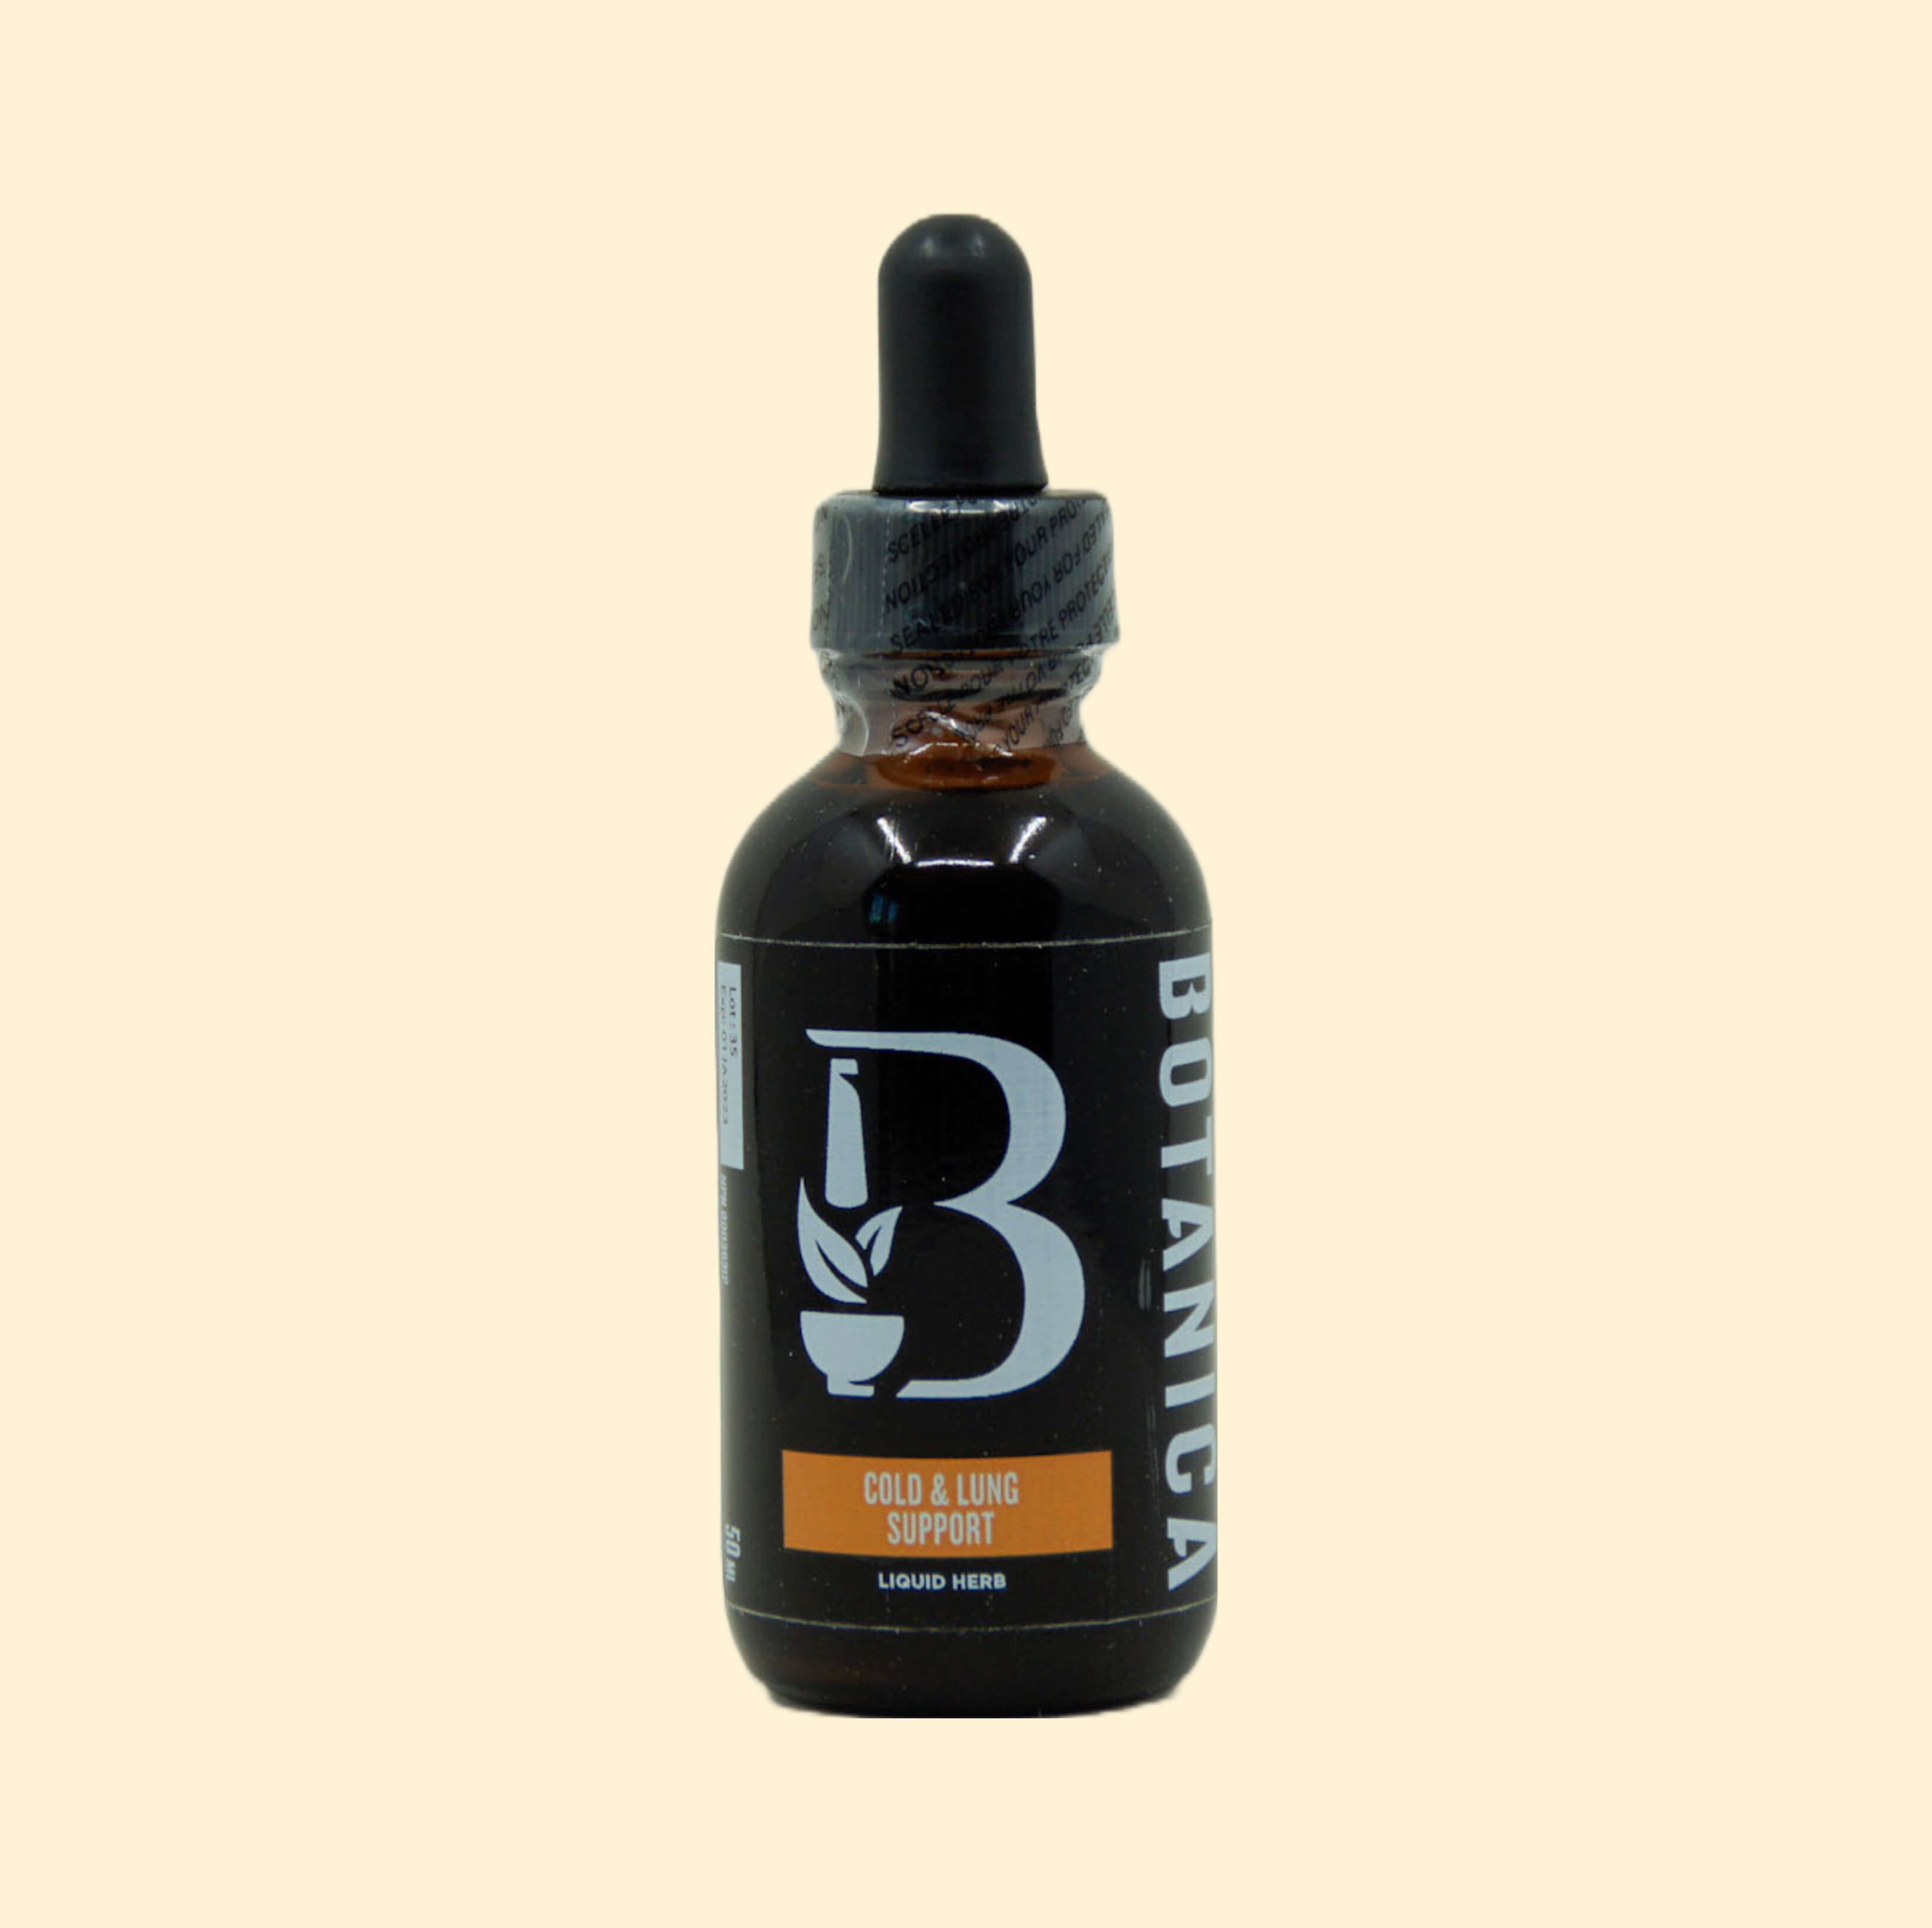 Cold and Lung Support Tincture